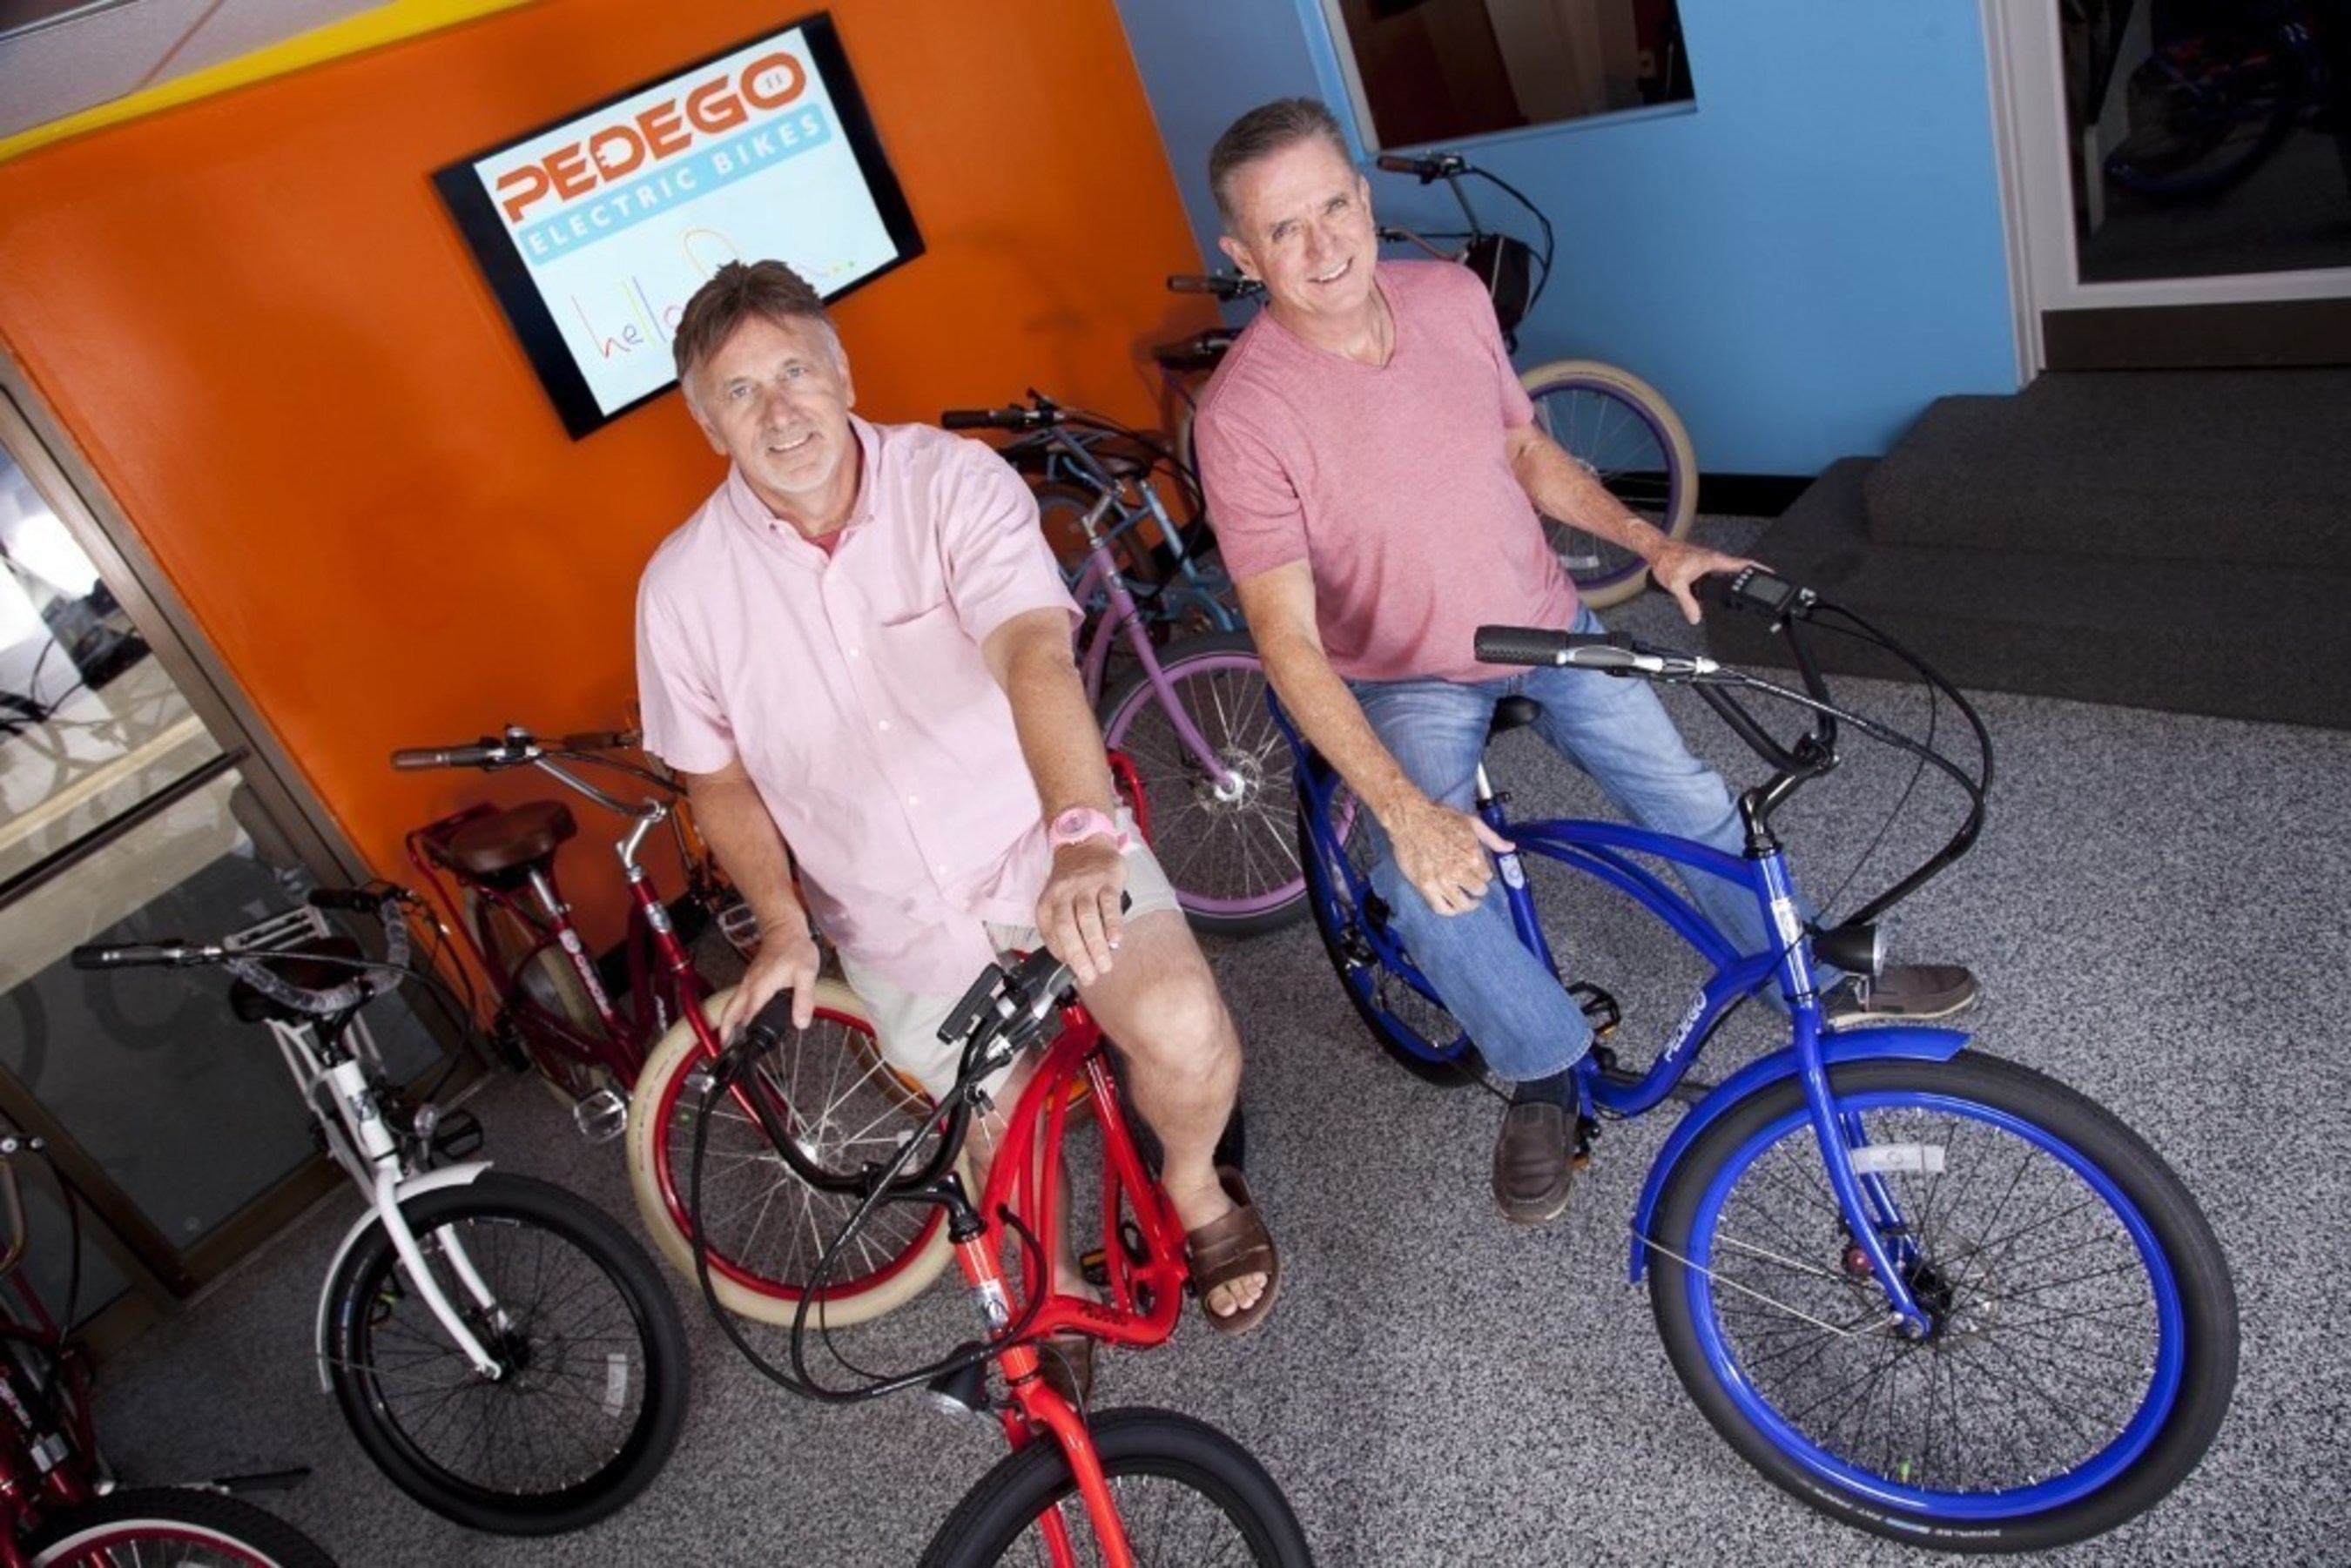 Pedego Co-Founders Don DiCostanzo and Terry Sherry